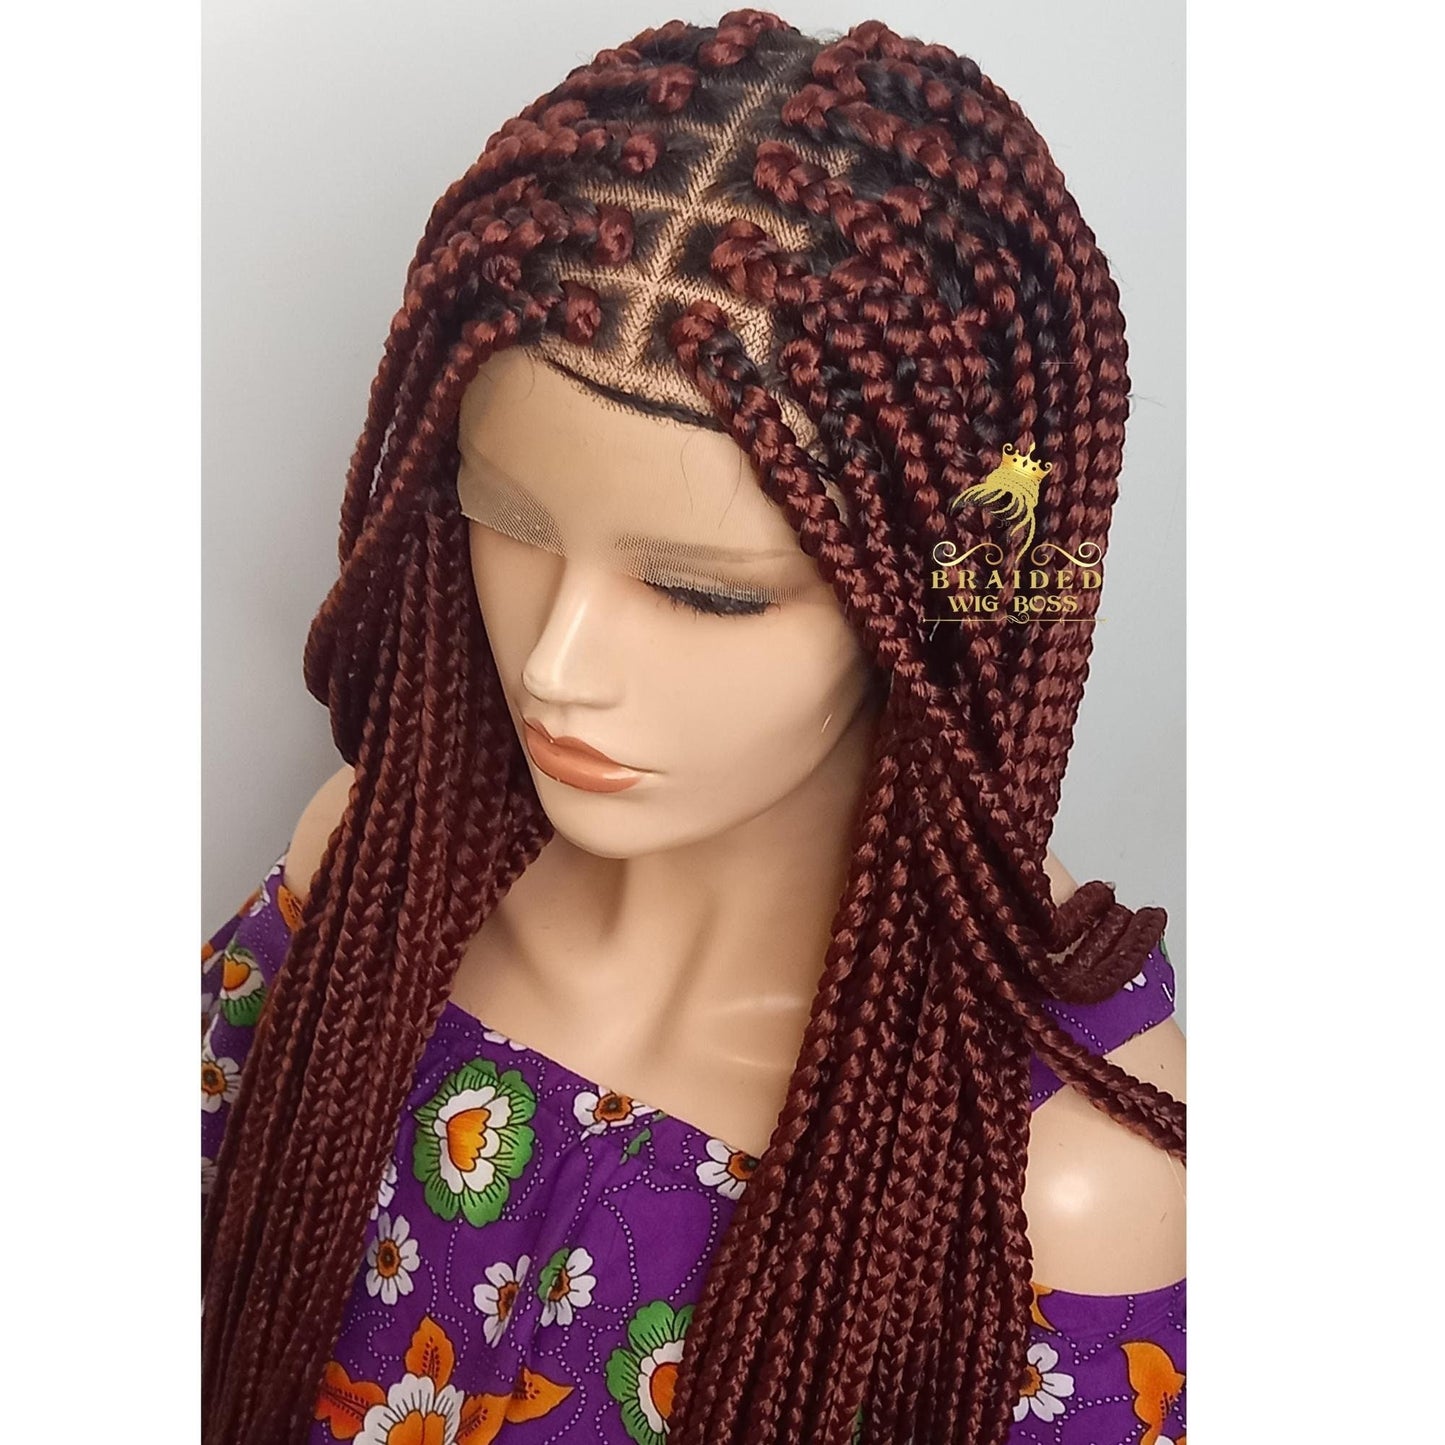 Box braid wig on a full lace braided wigs for black women human hair lace front clearance braided lace wig for sale